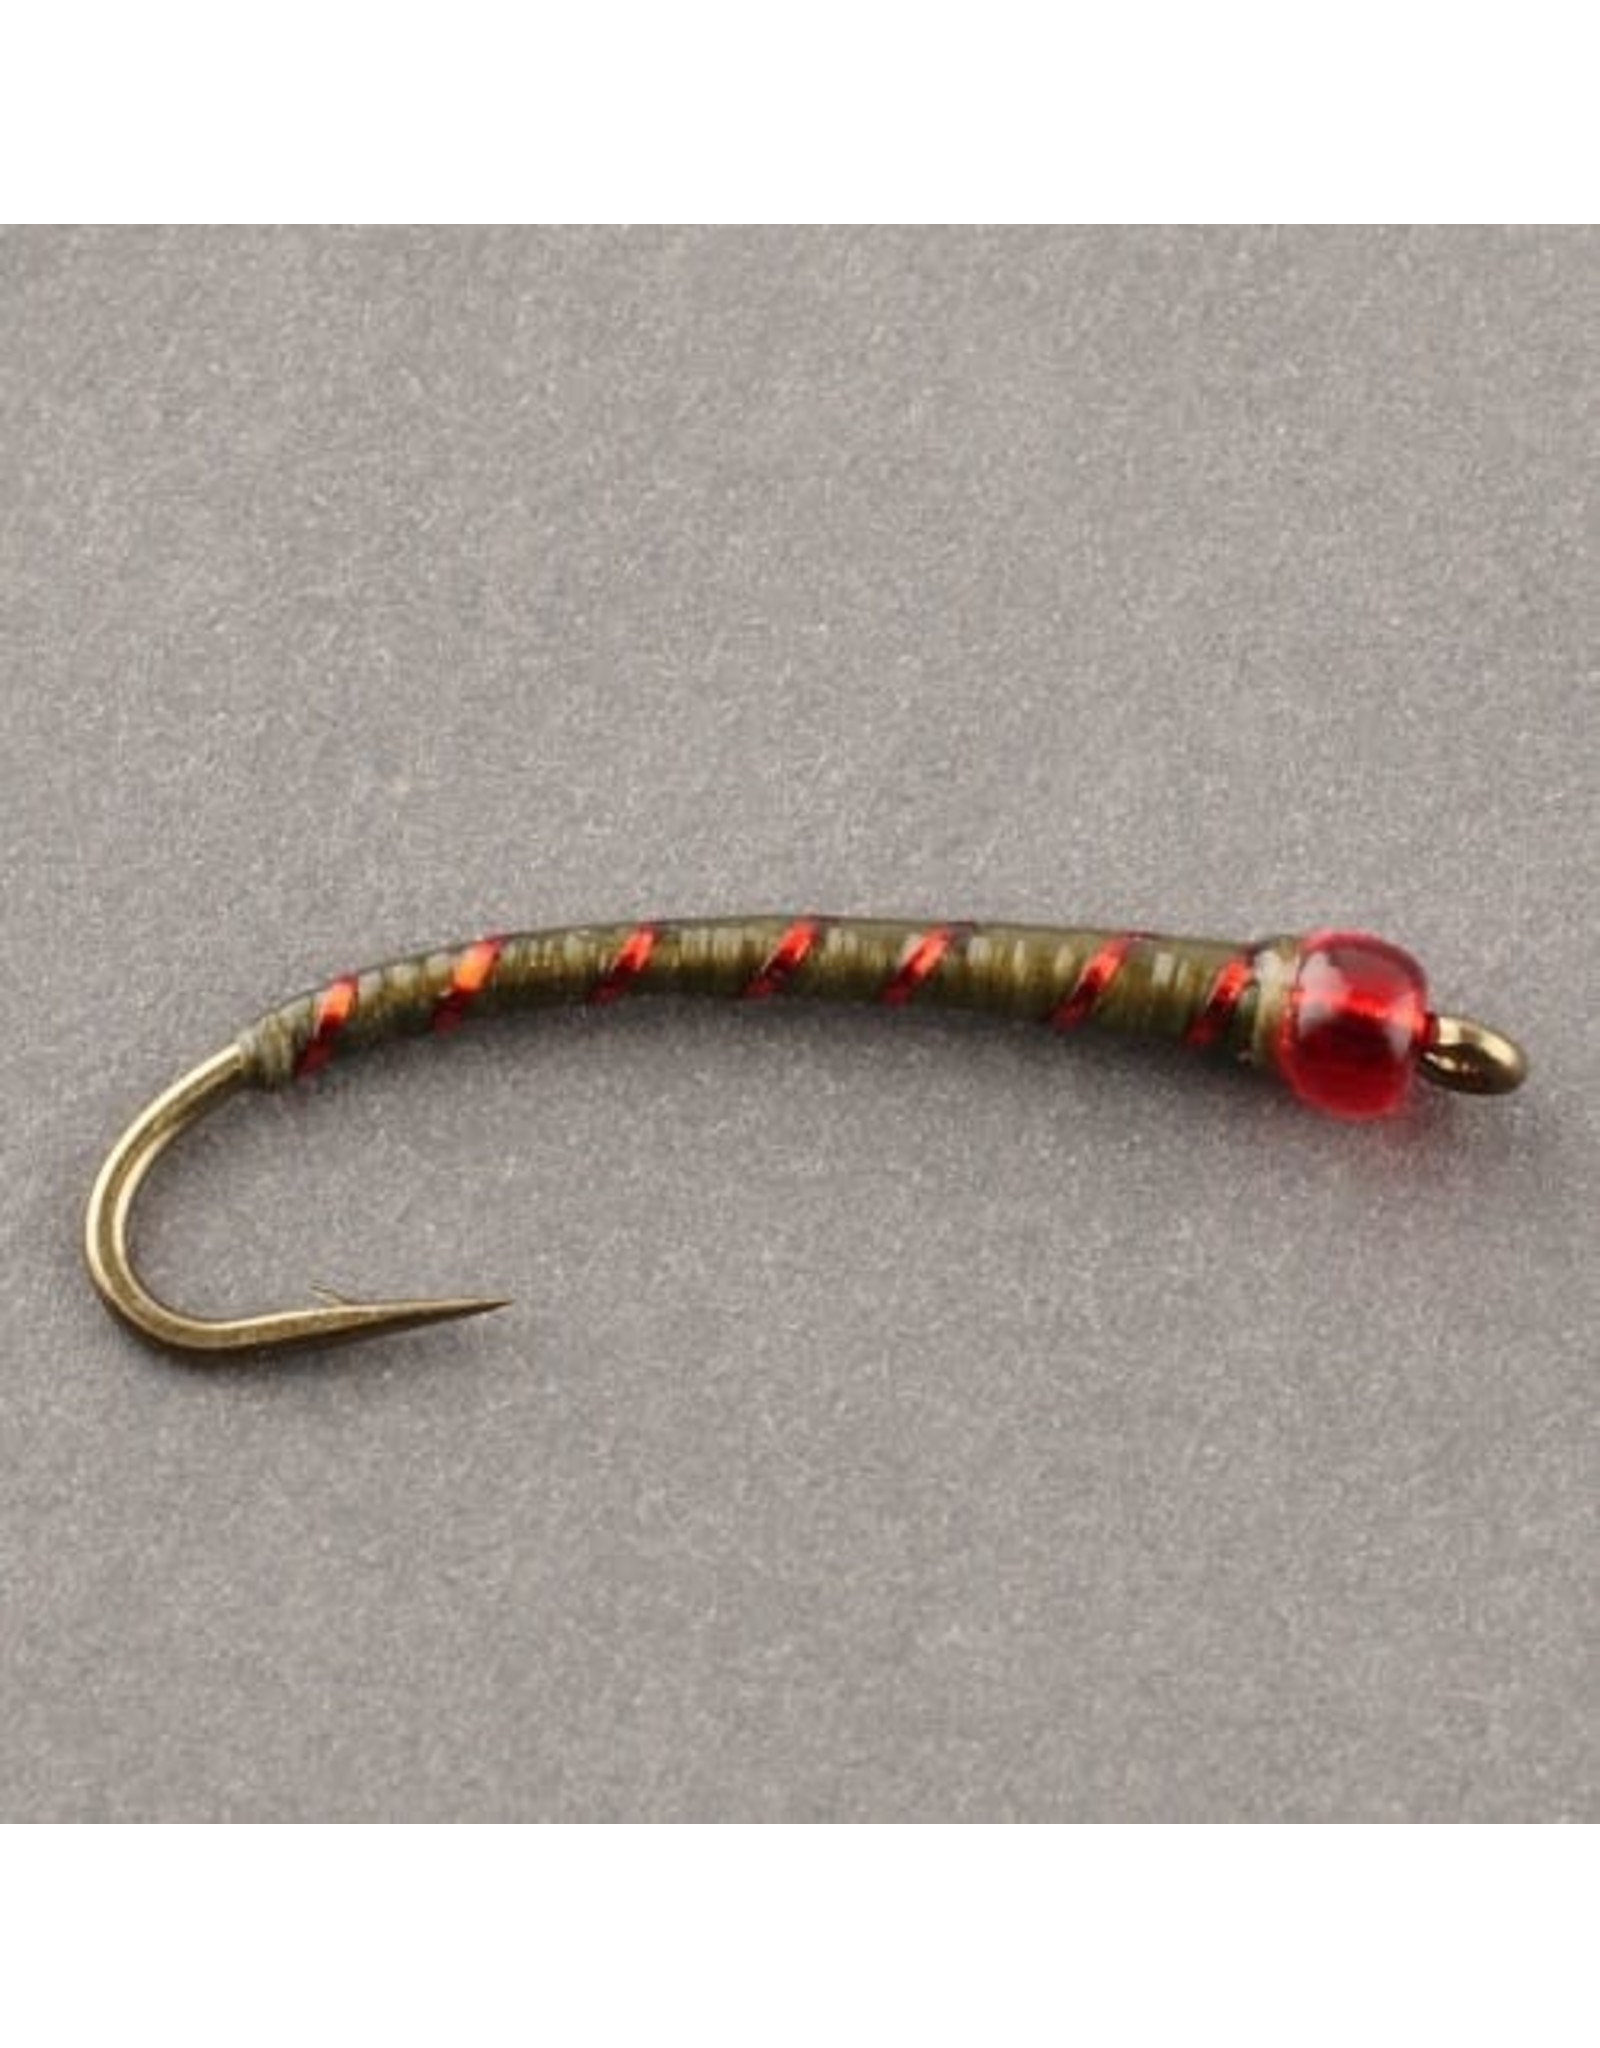 RB POWDER OLIVE/RED BLOODWORM 3032 #12